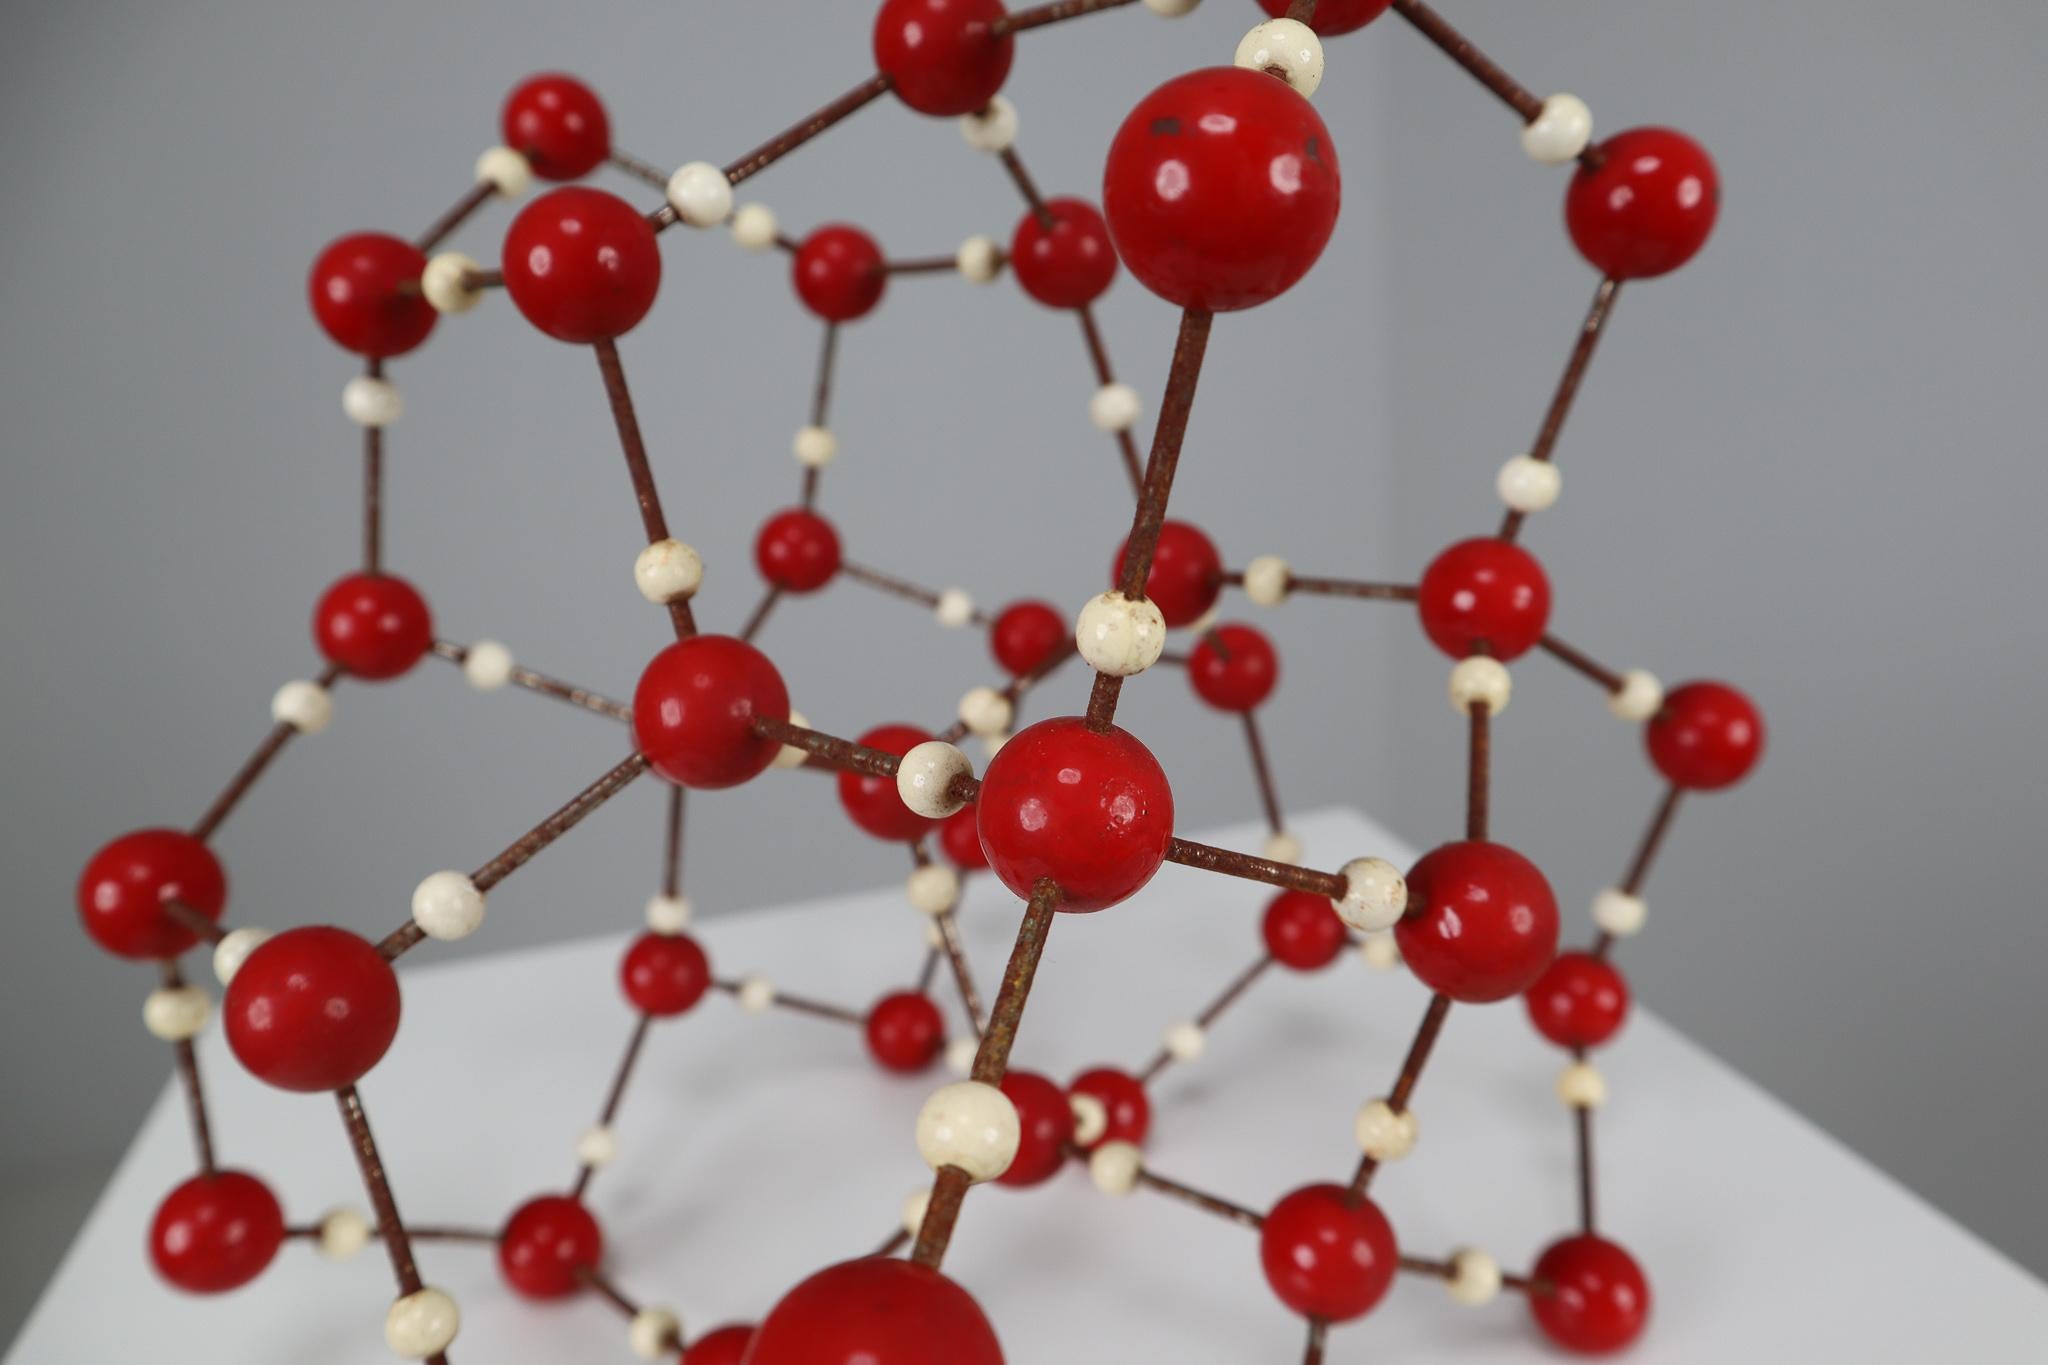 Metal Midcentury Molecular Structure for Didactic Purposes Made in the 1950s